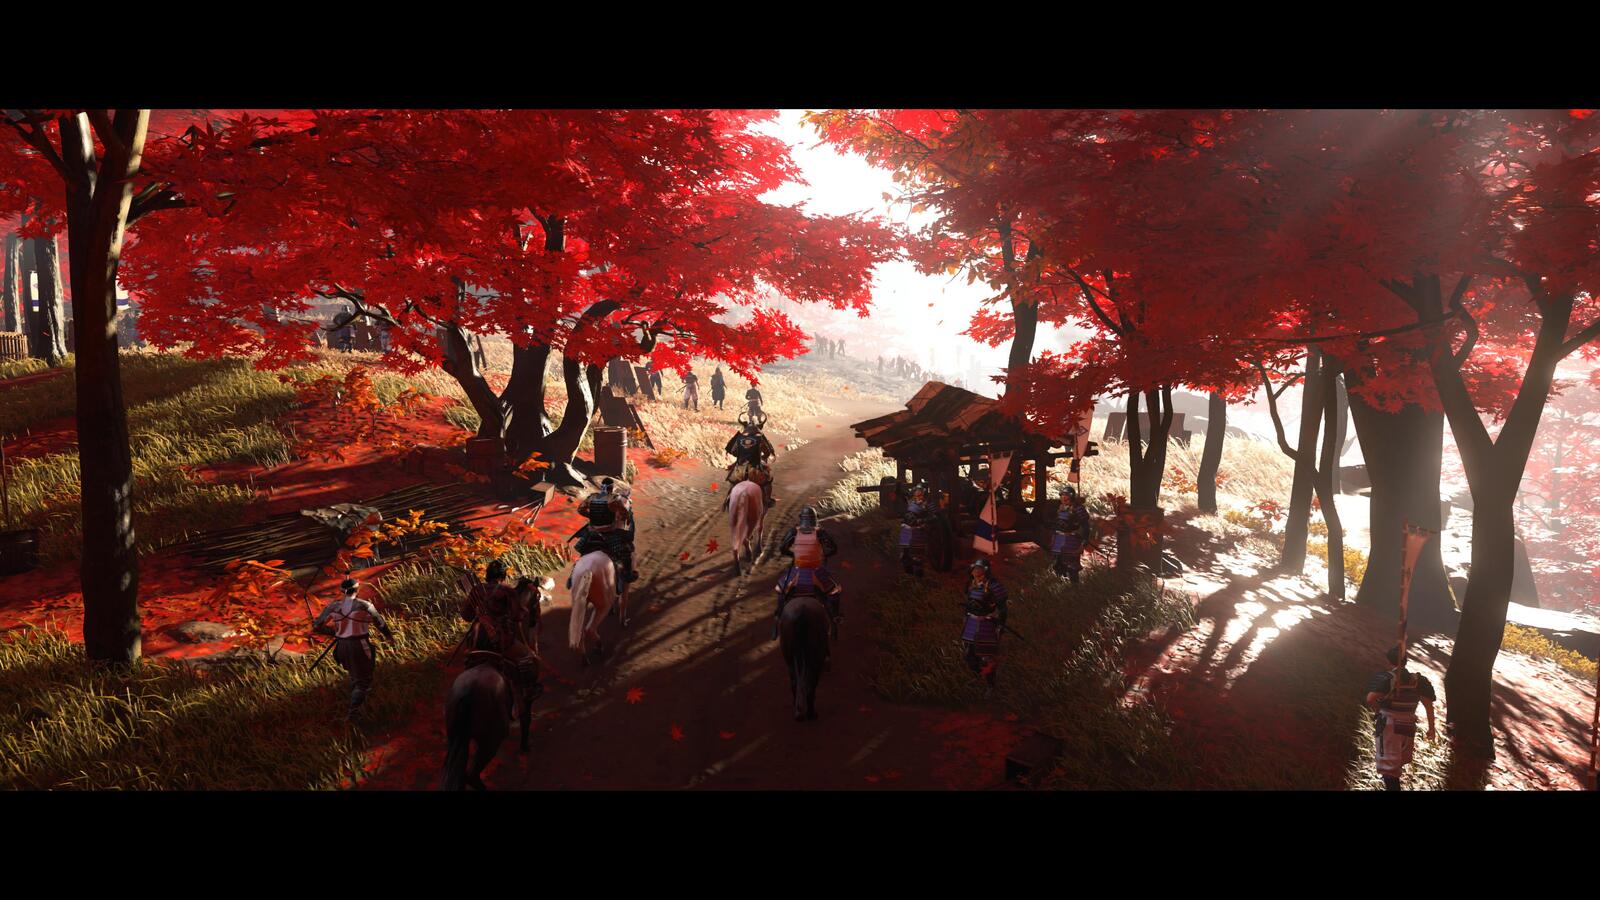 Characters in an autumn forest with the leaves turning a bright red